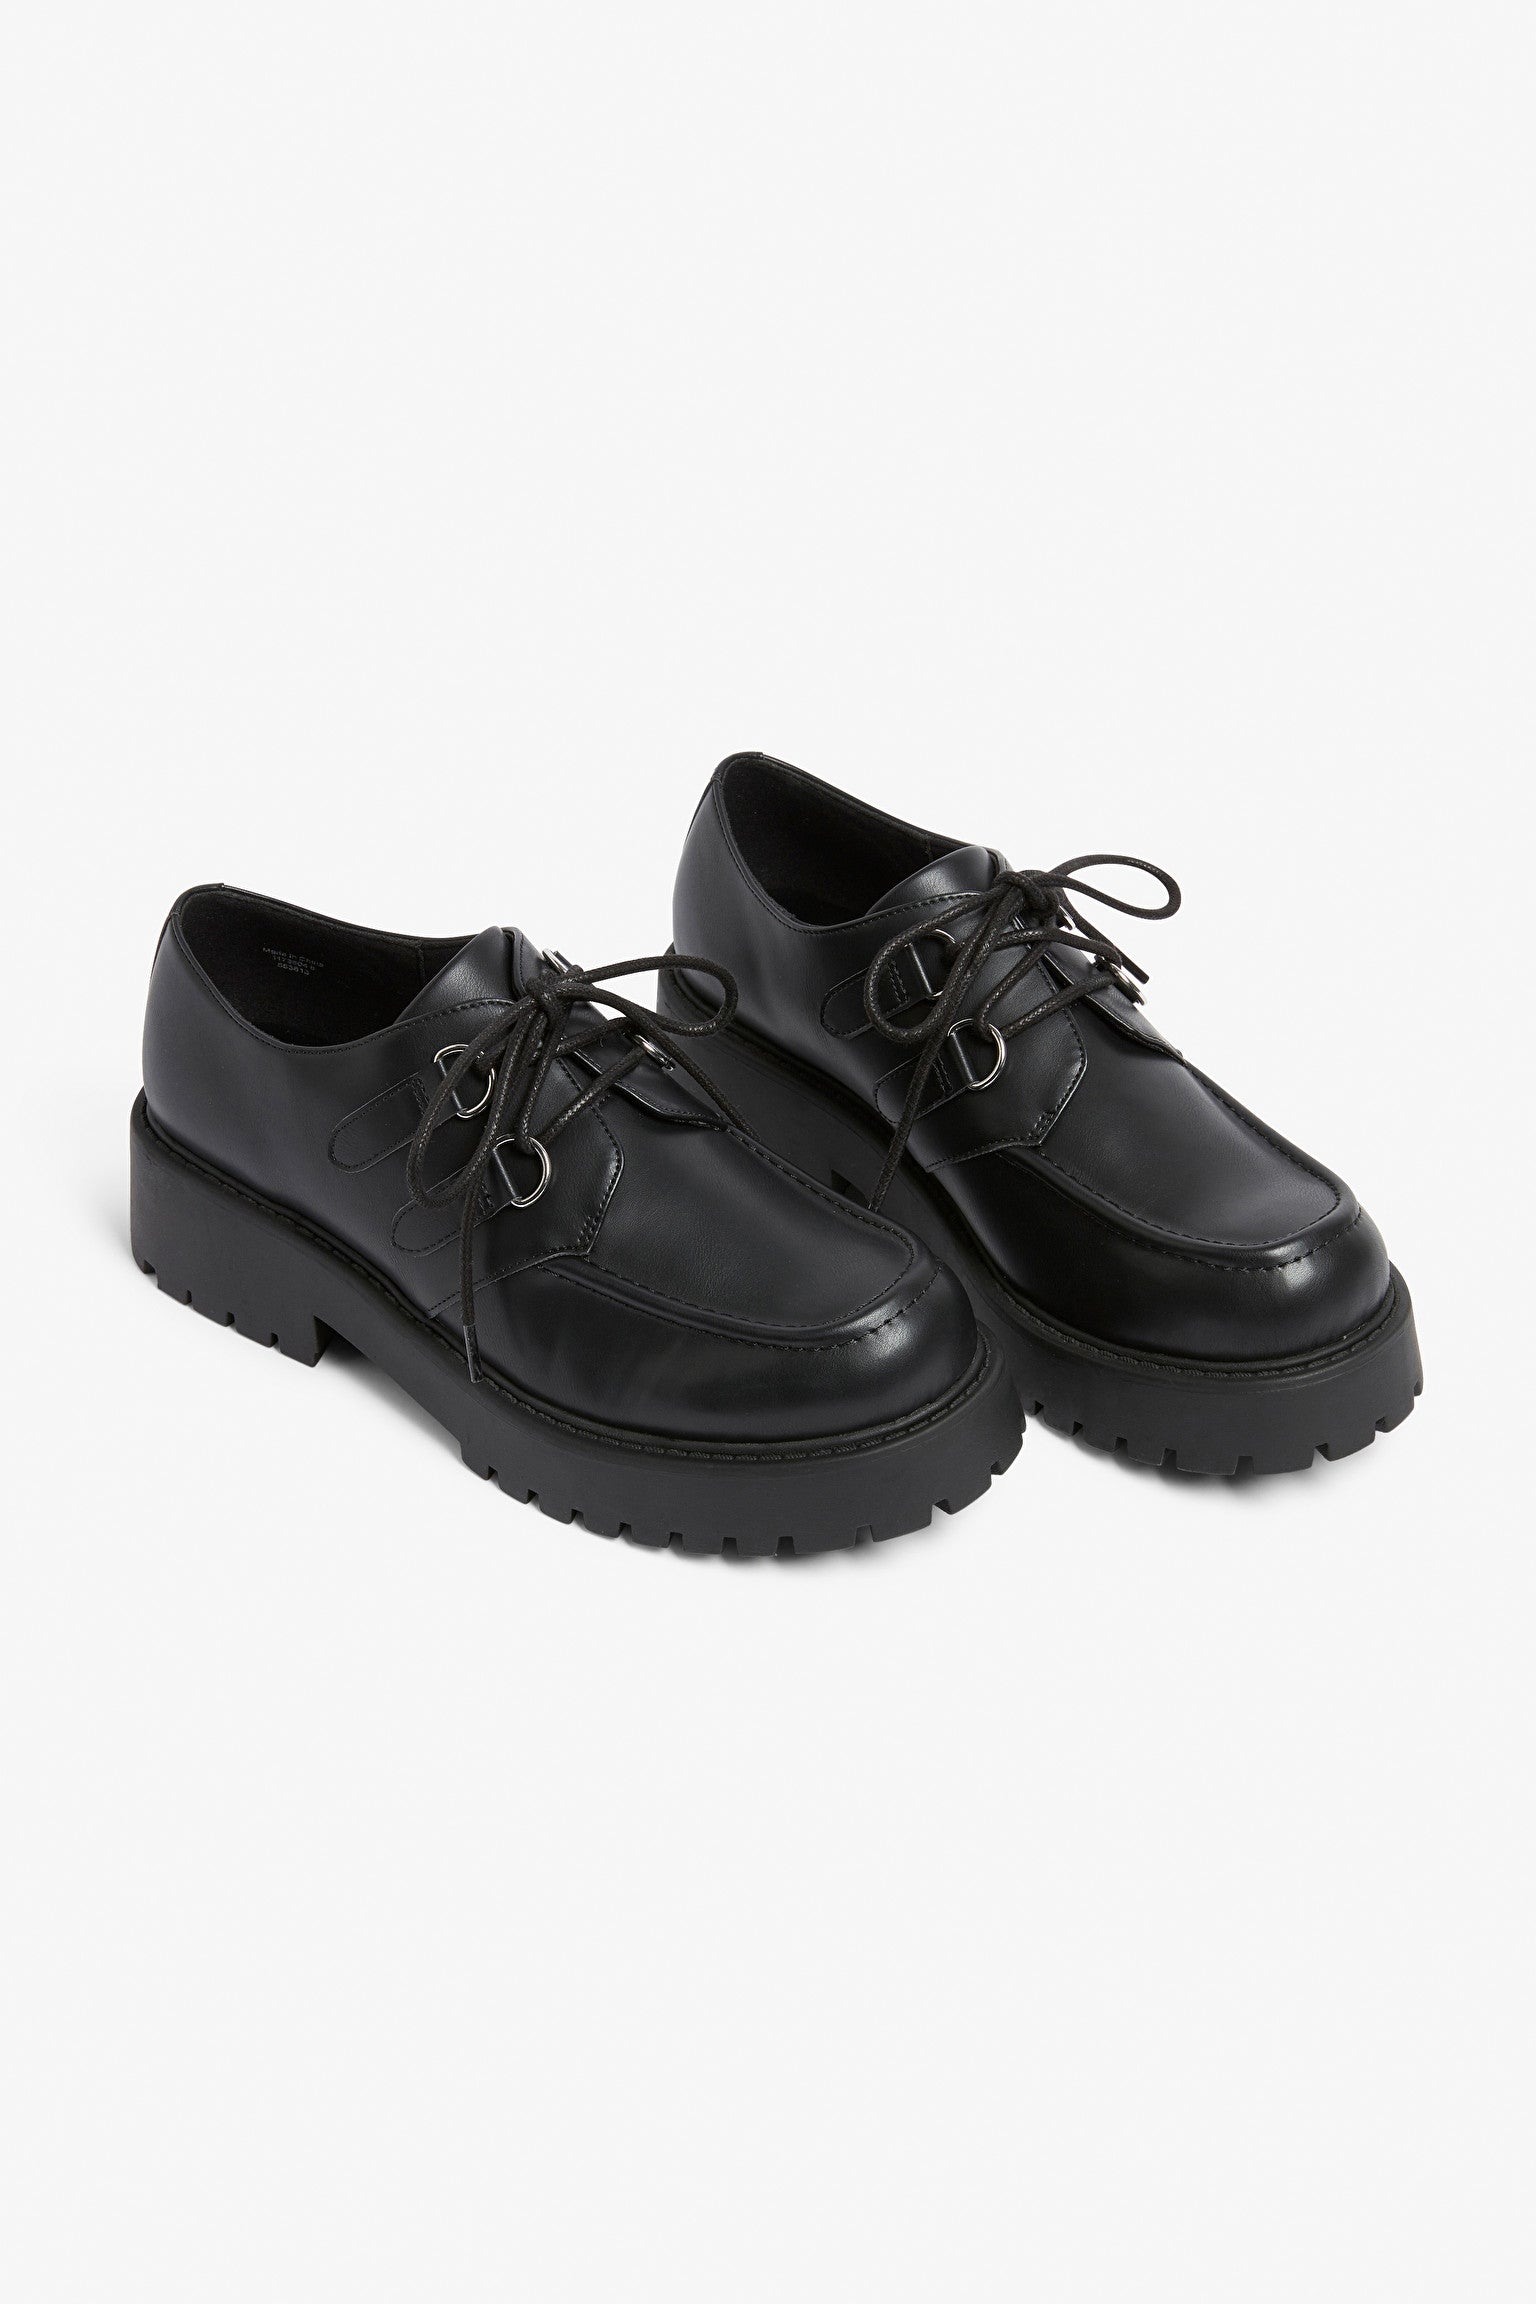 MONKI LACE-UP LEATHER SHOES IN BLACK